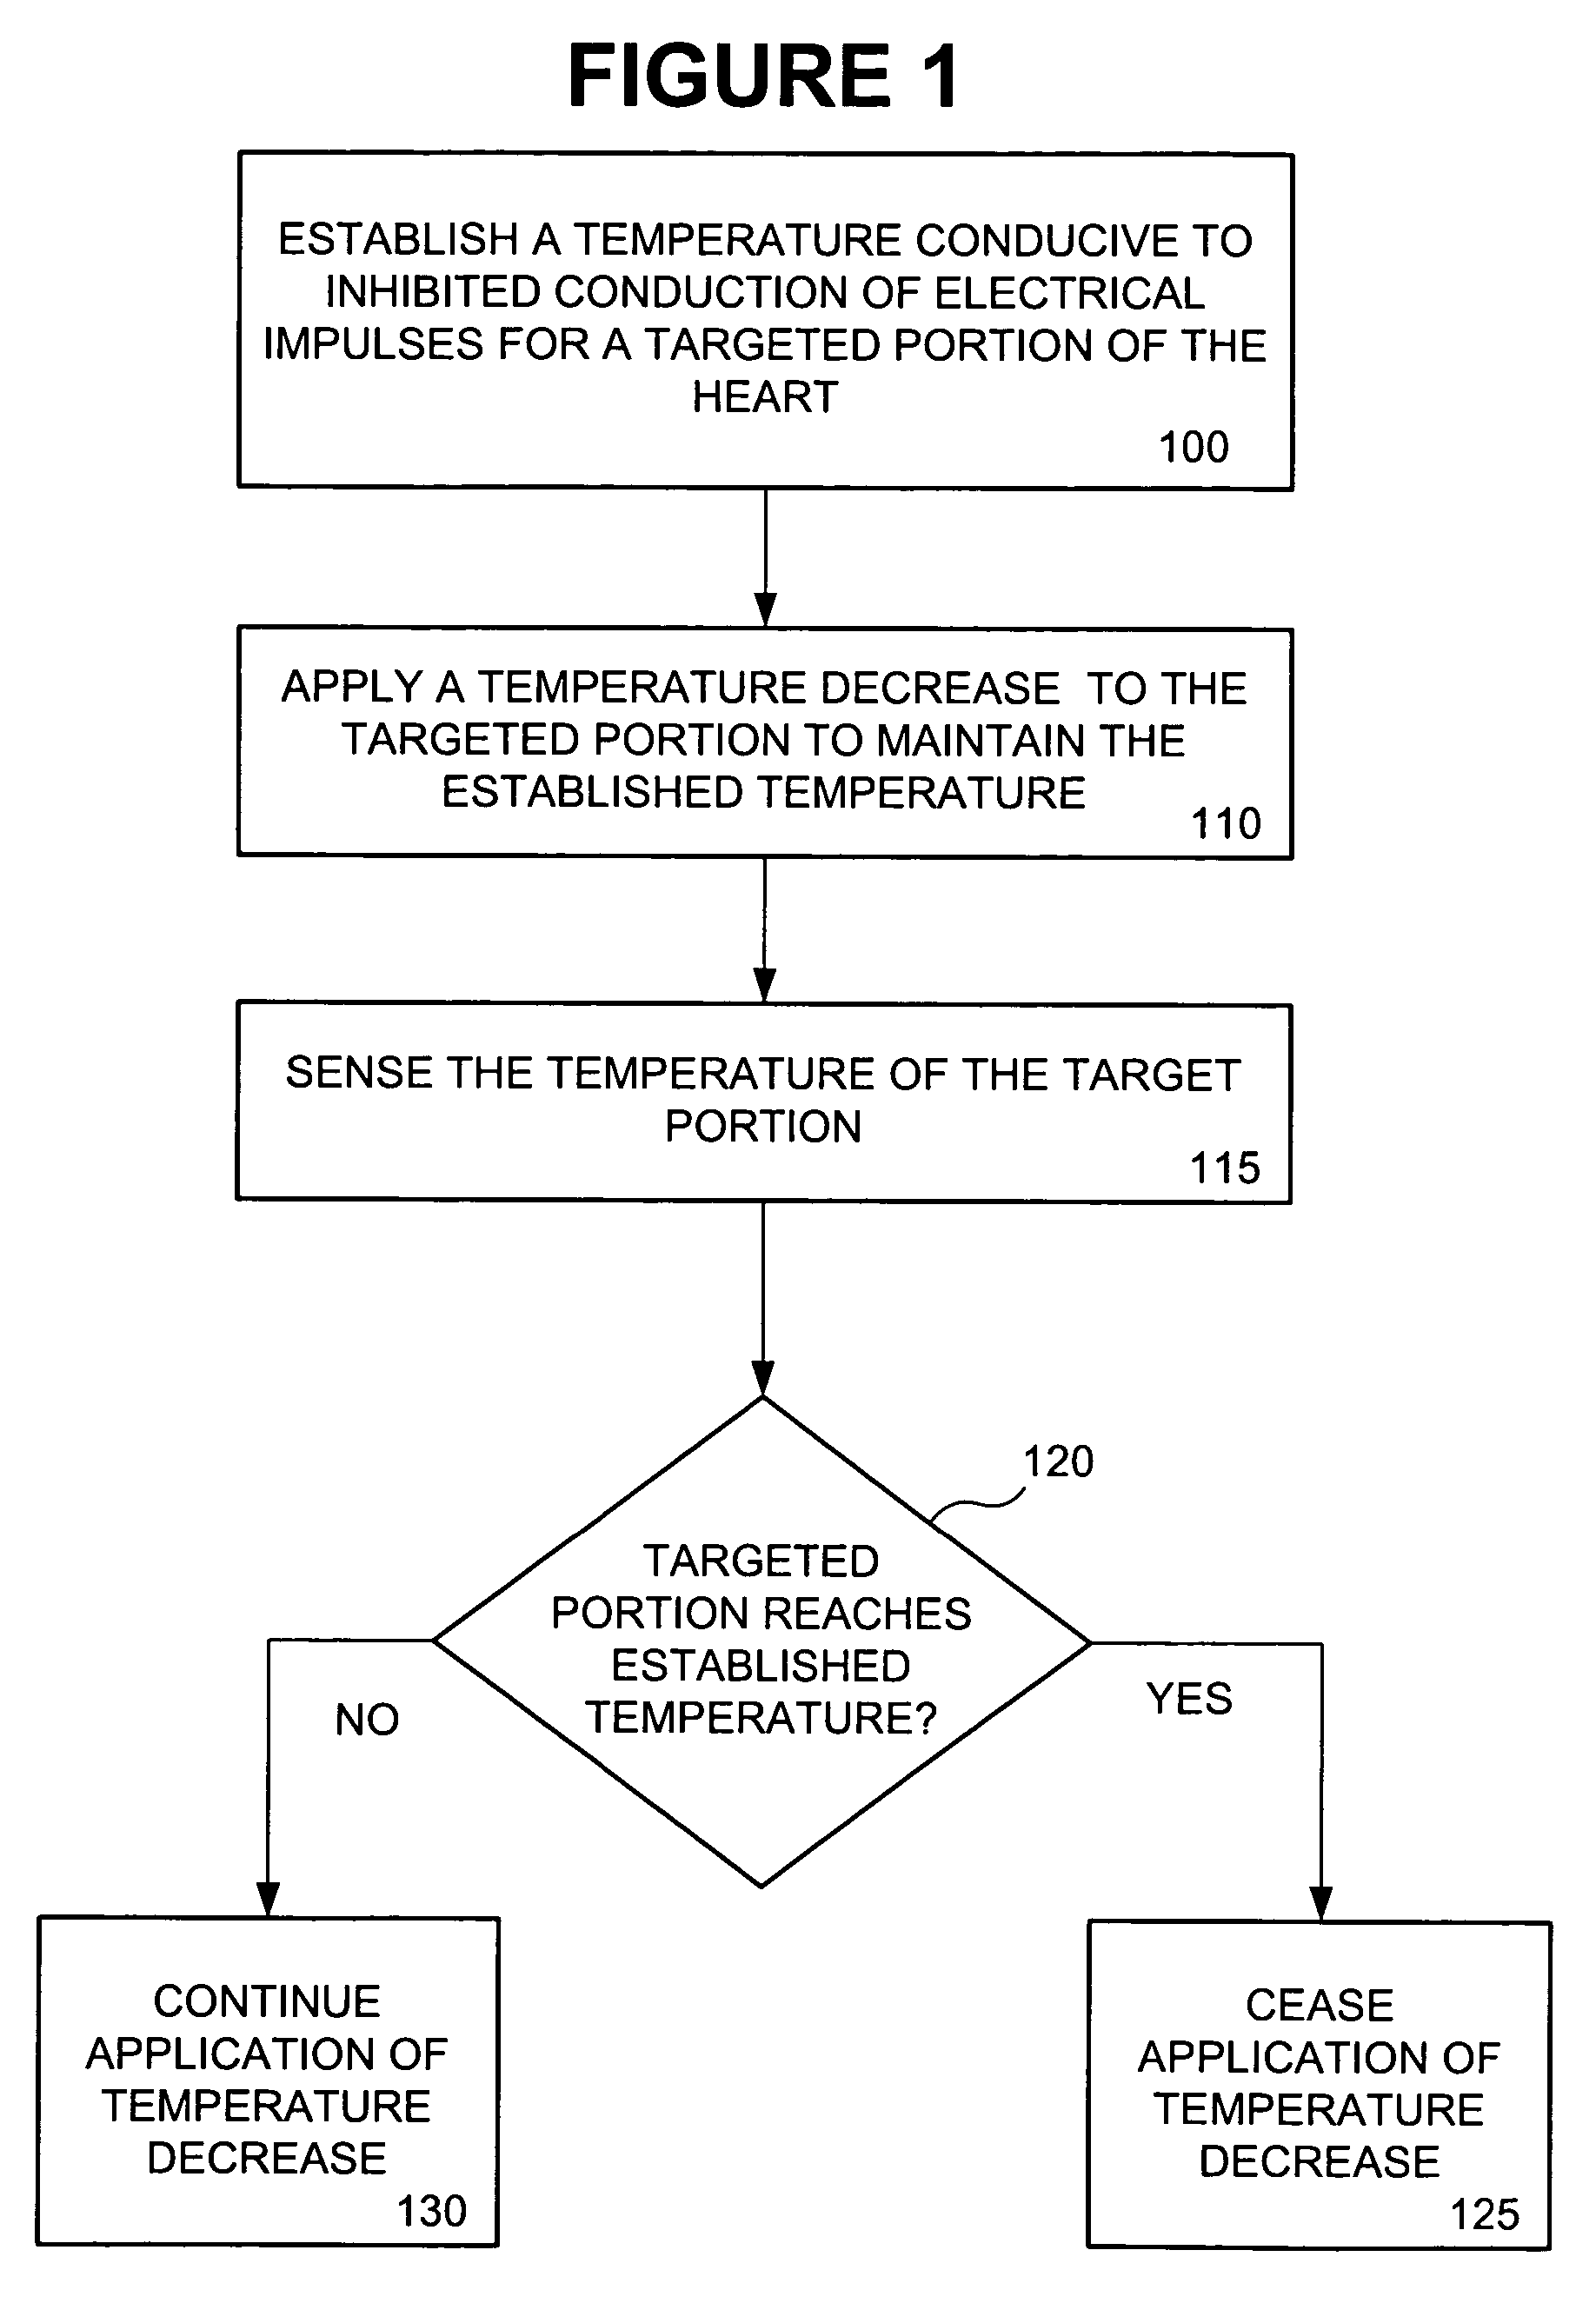 System and method for breaking reentry circuits by cooling cardiac tissue